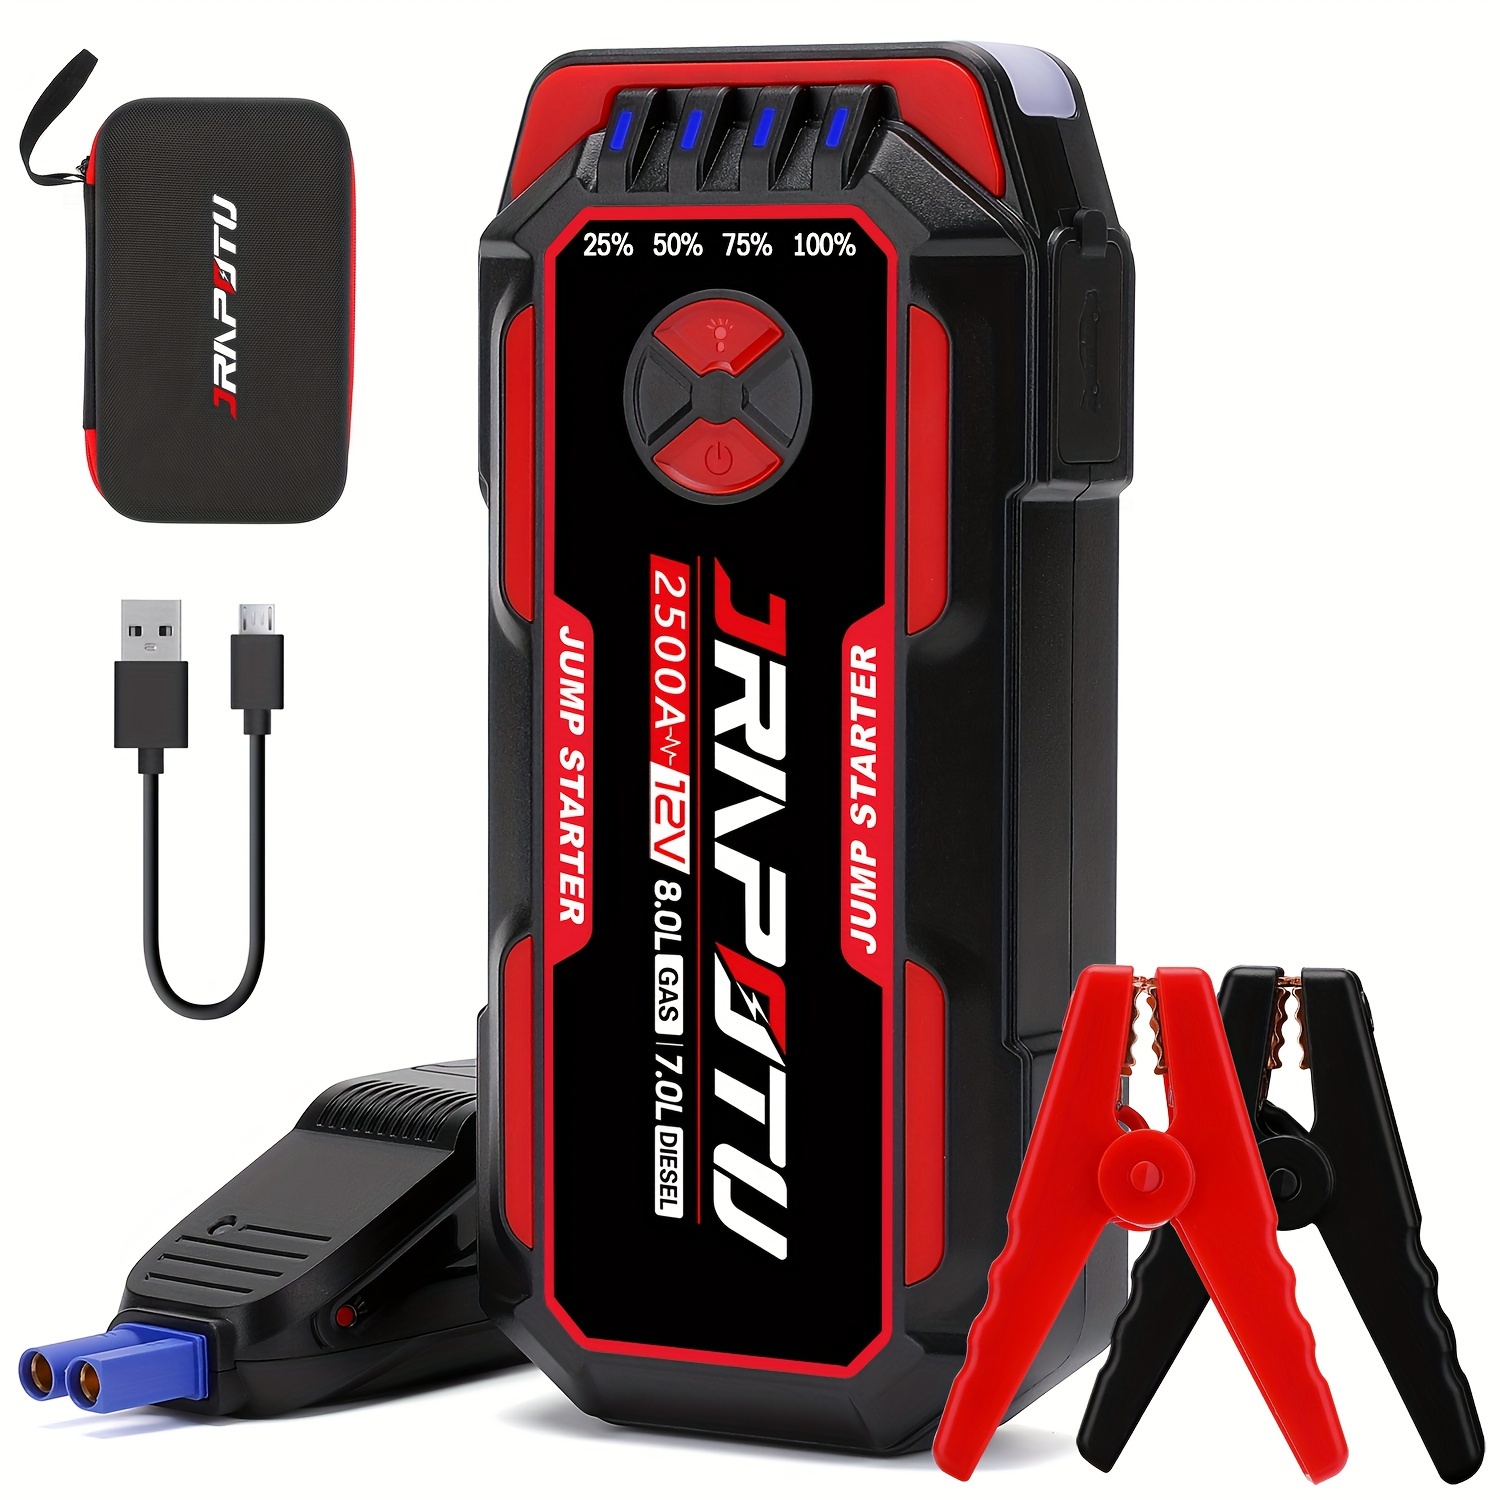 

Car Jump Starter 2500a Pack For Up To 8.0l Gas And 7.0l Engines, 74wh Portable 12v Jump Box With Usb Ports, Lcd Display, Storage Case, And Led Light